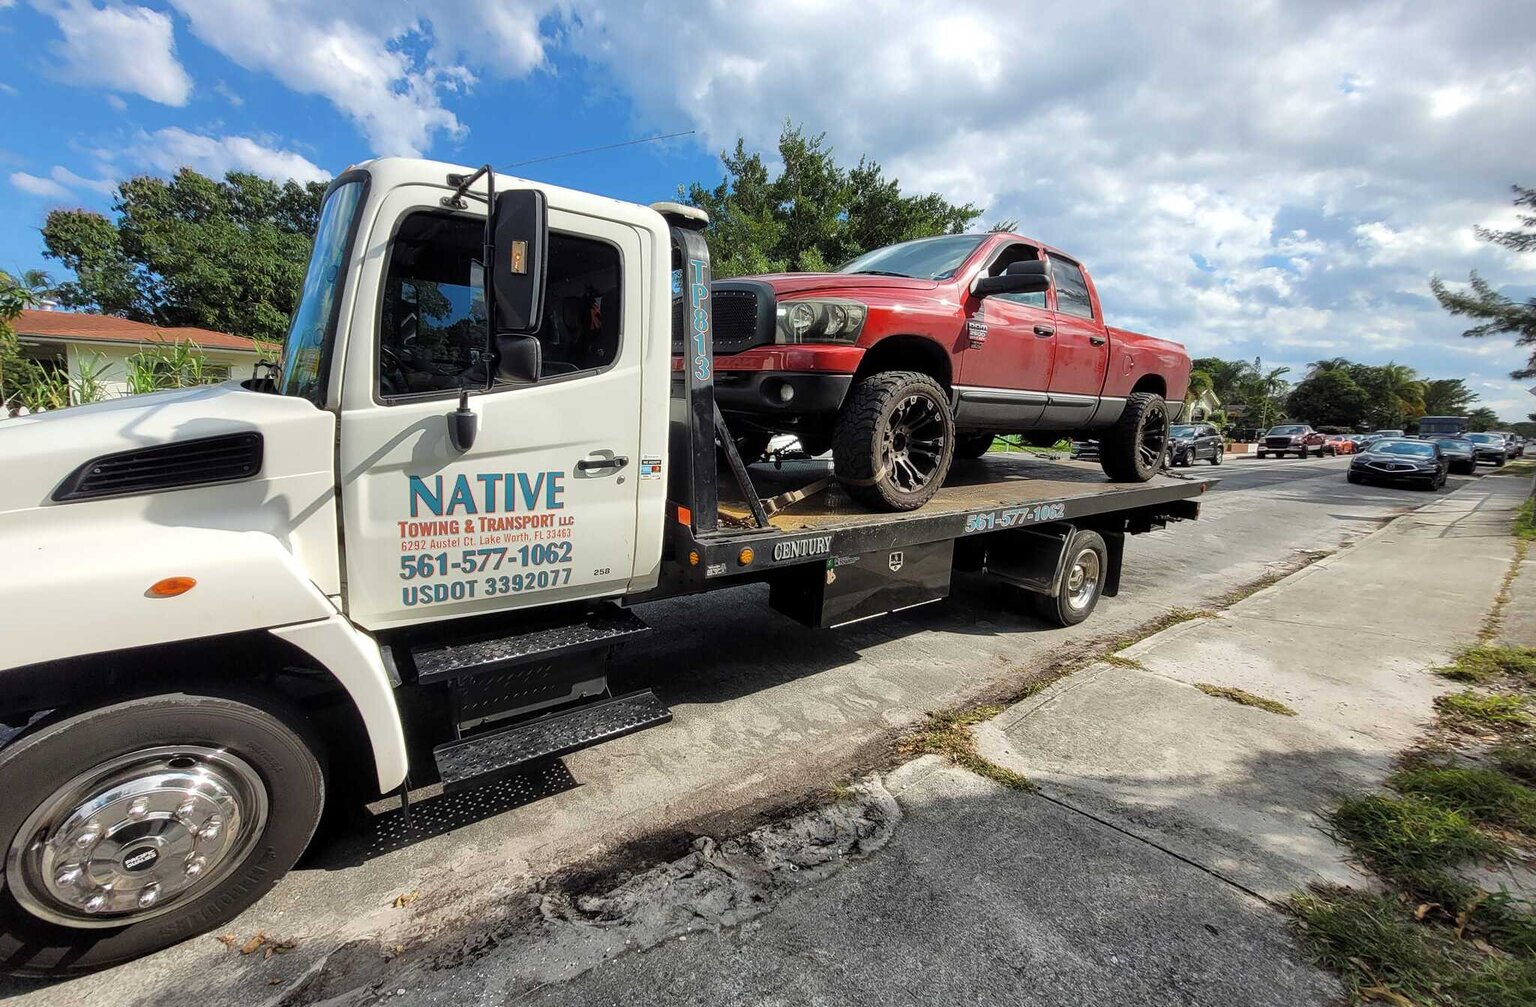 How Much Does a Tow Truck Typically Cost?